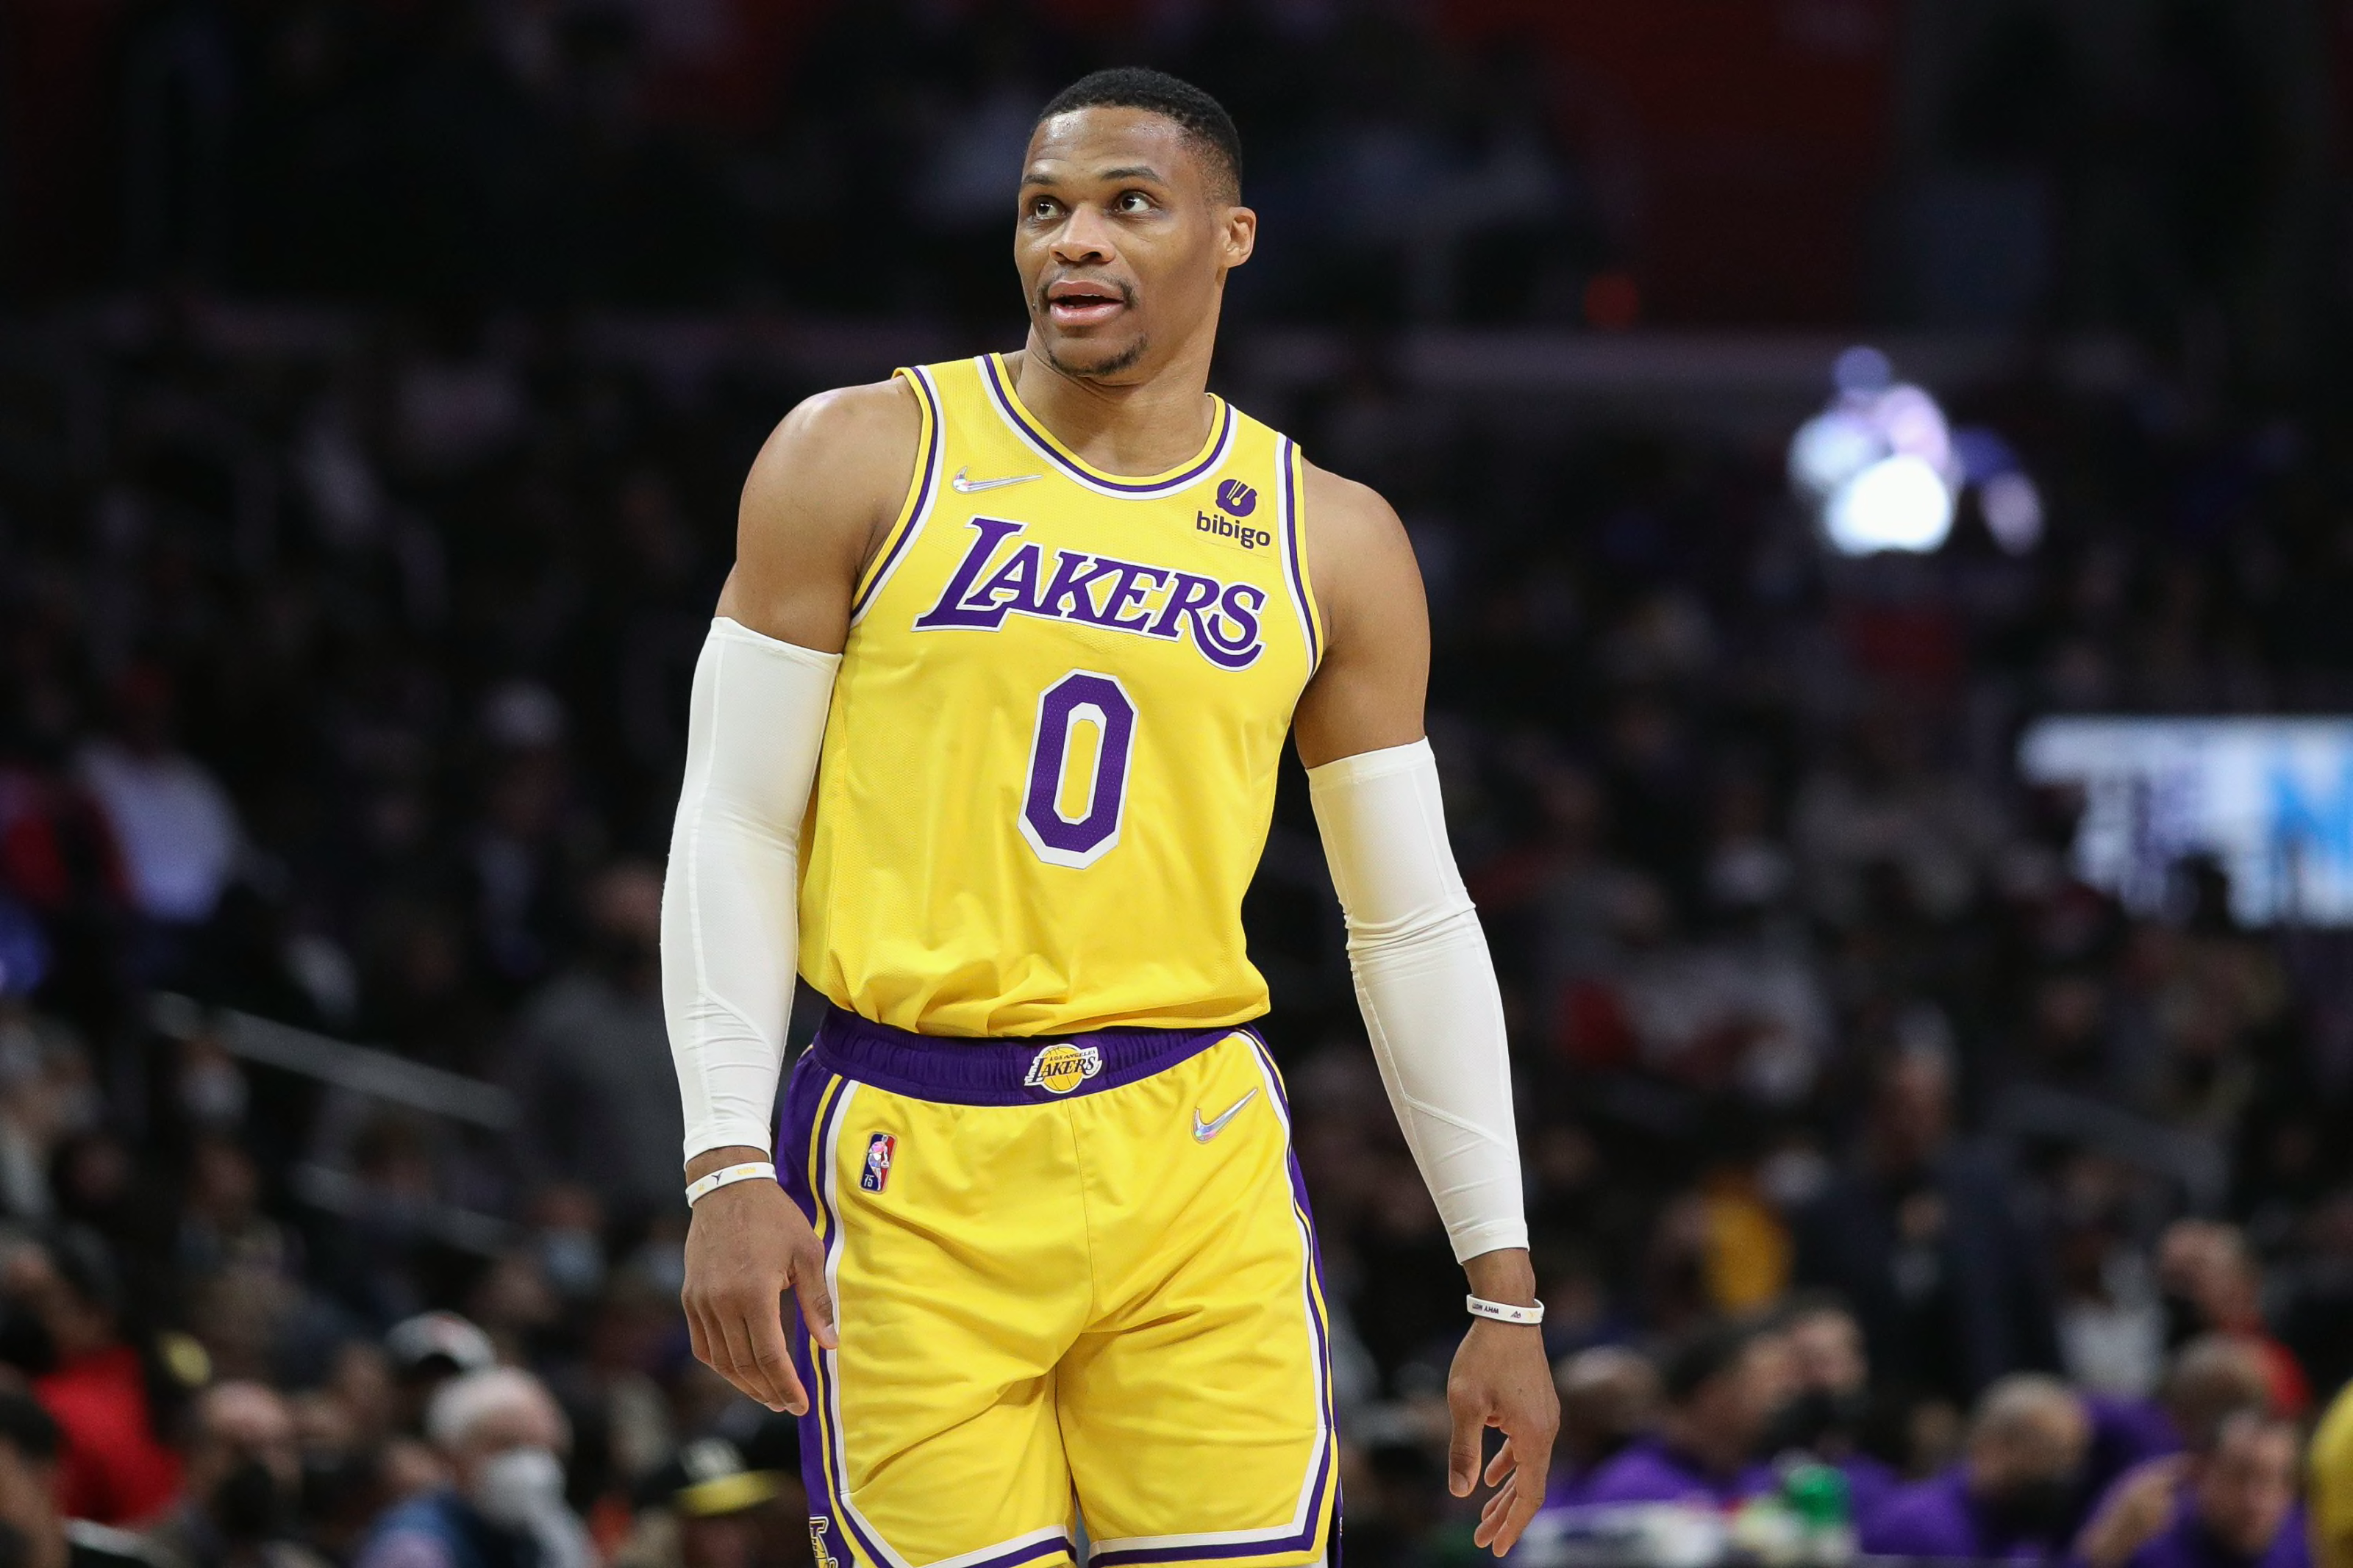 NBA Rumors: Lakers declined Russell Westbrook for John Wall trade